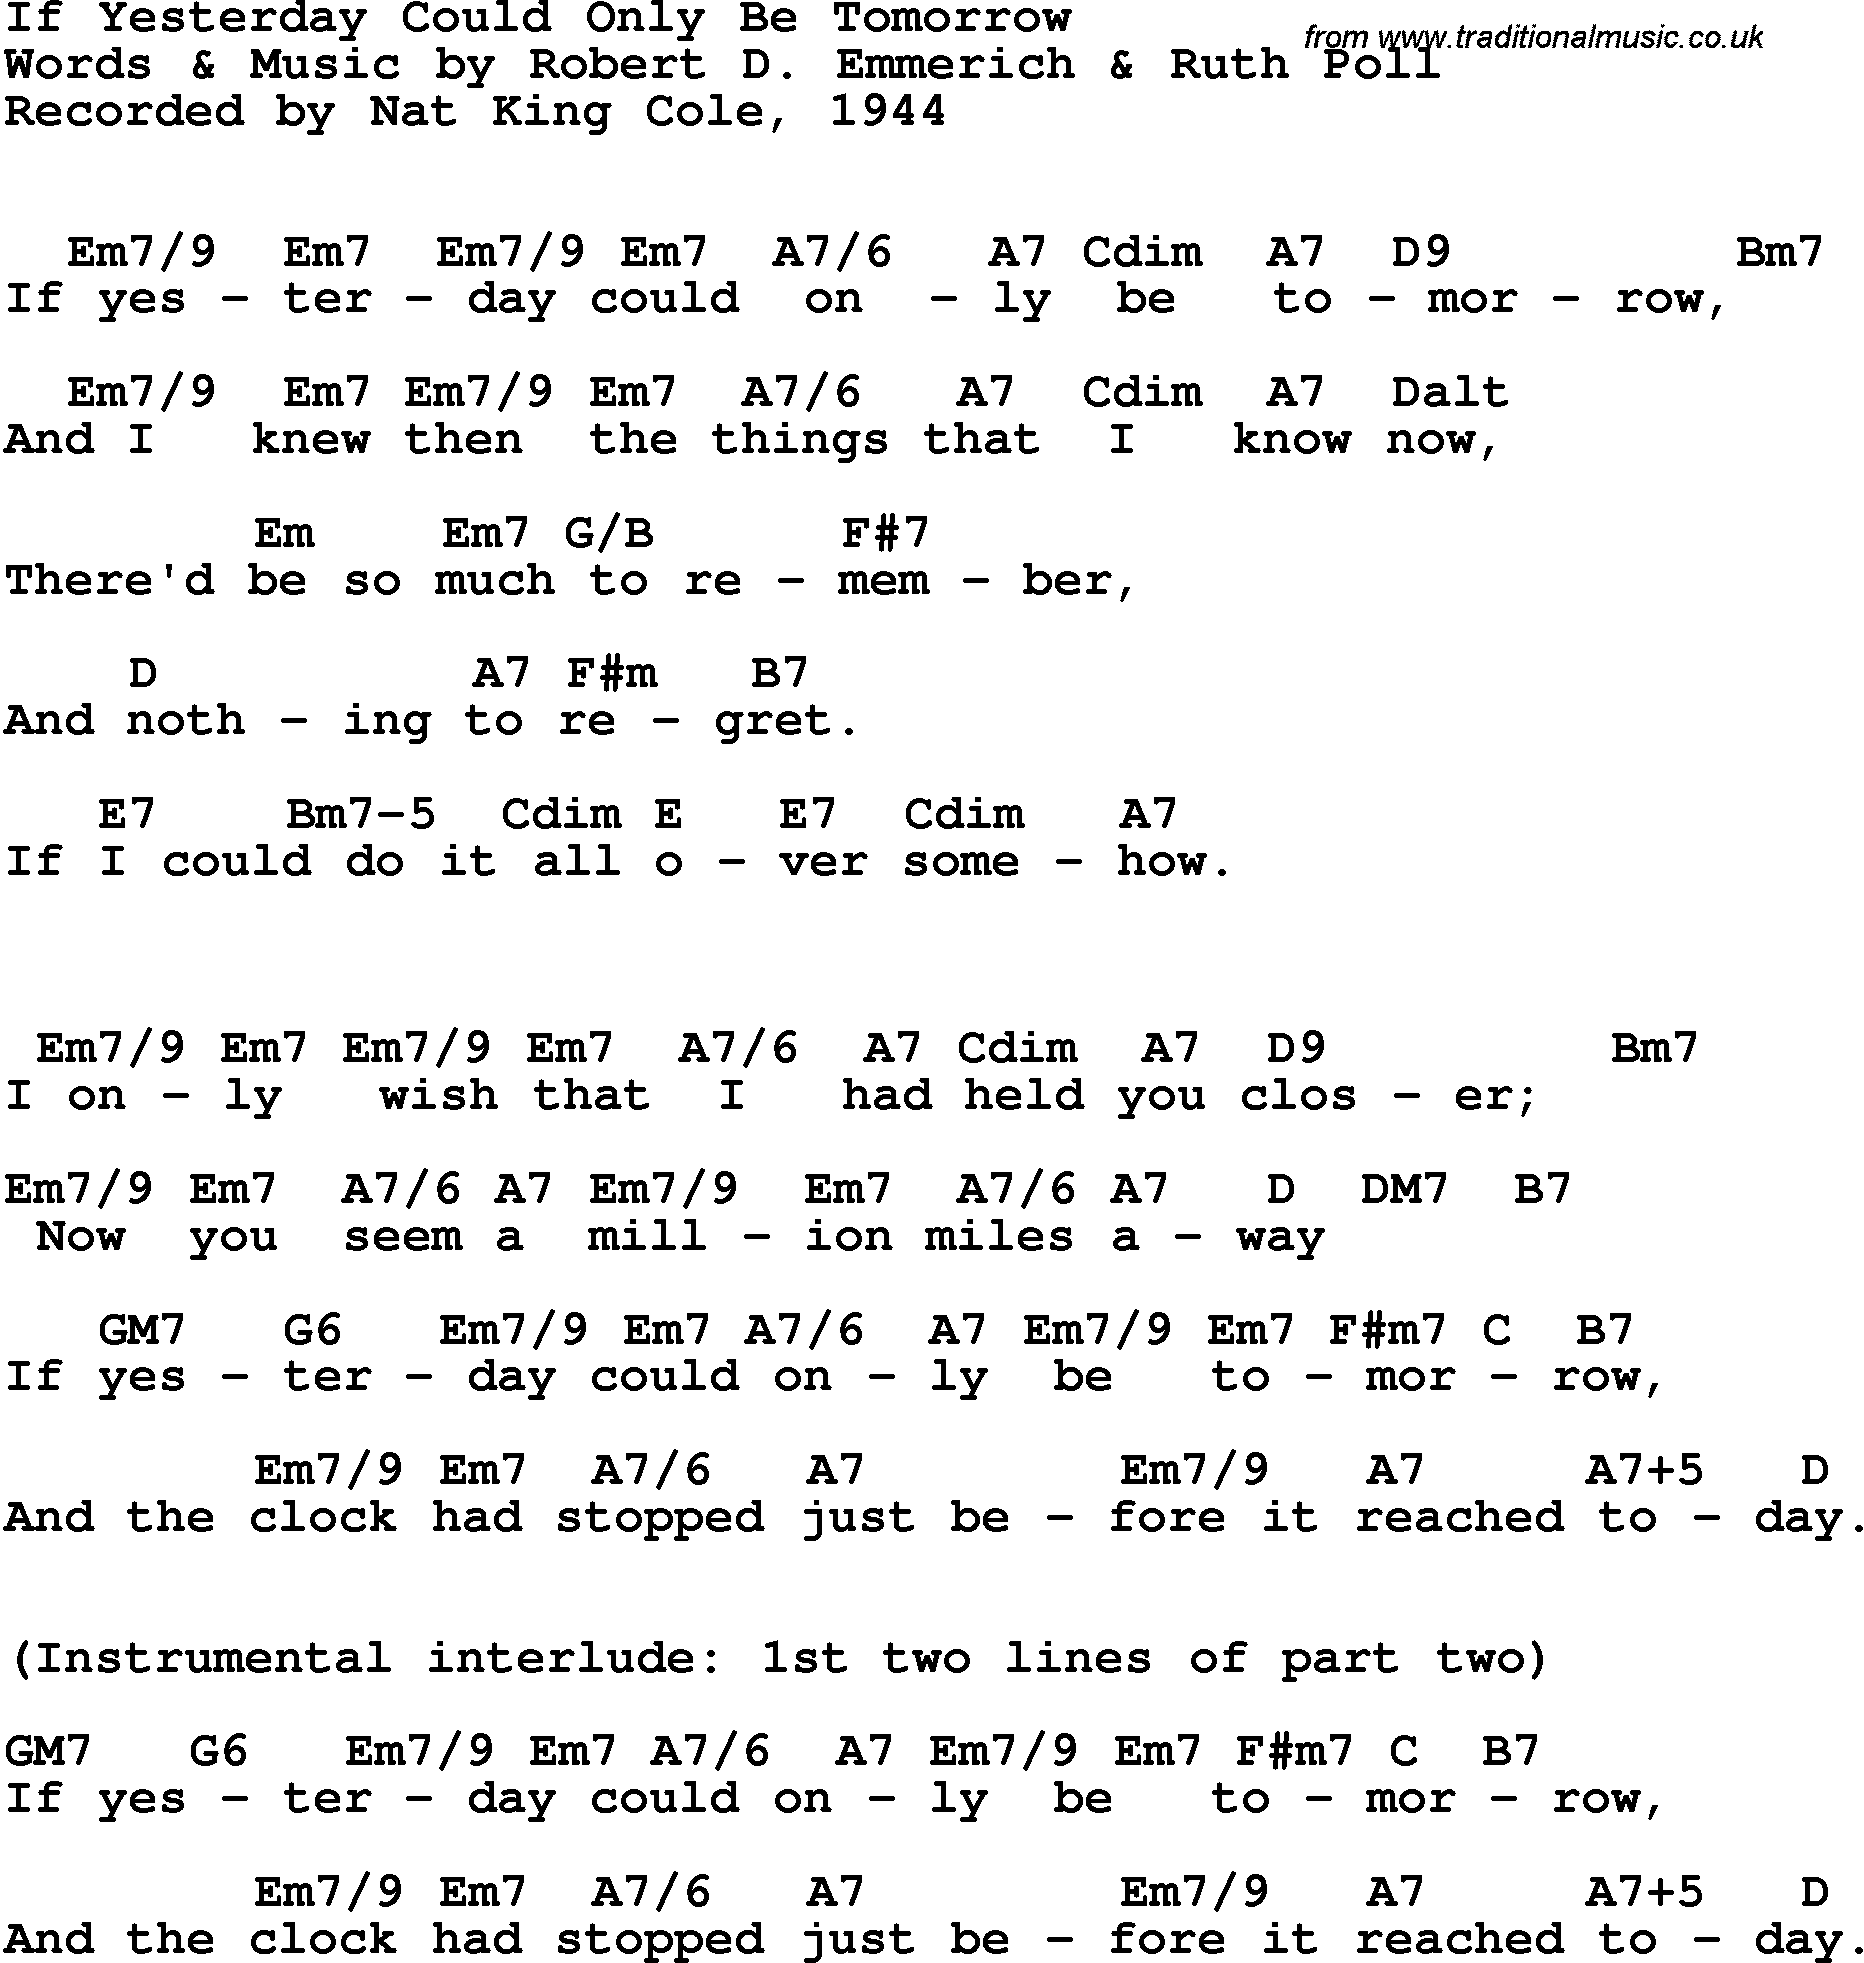 Song Lyrics with guitar chords for If Yesterday Could Only Be Tomorrow - Nat King Cole, 1944